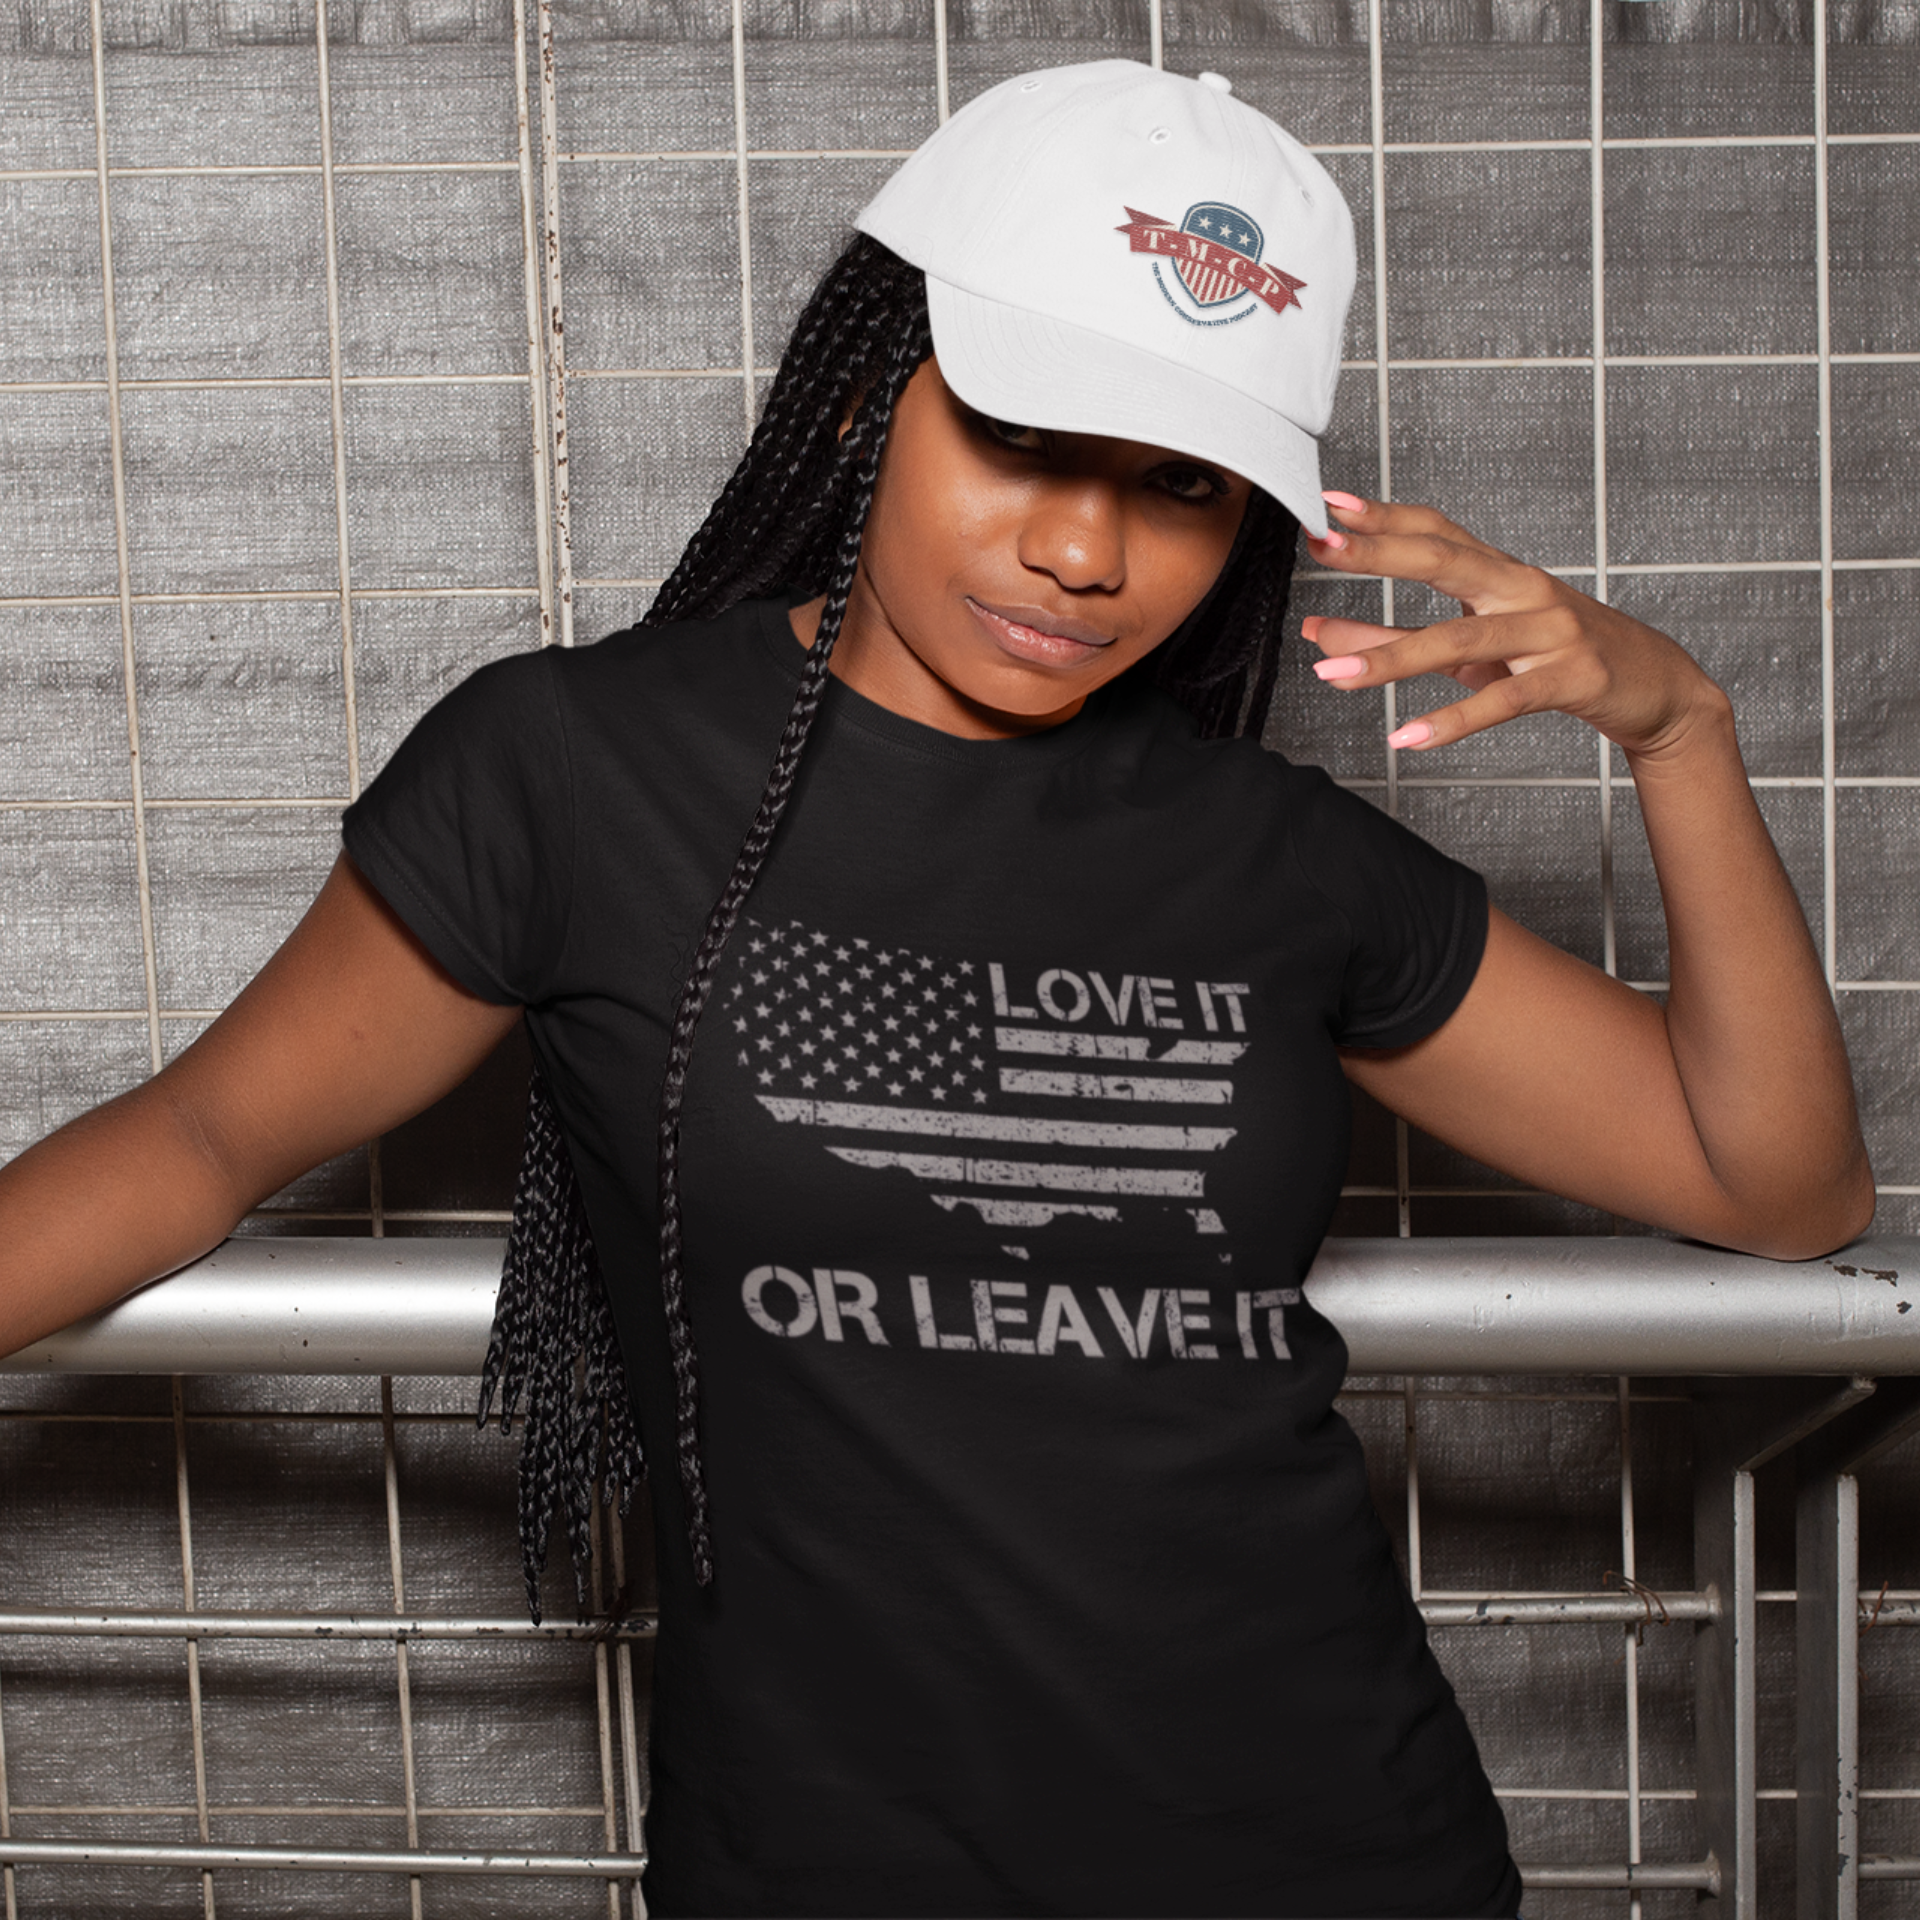 Love It Or Leave It Women's Short Sleeve T-Shirt with white hat front